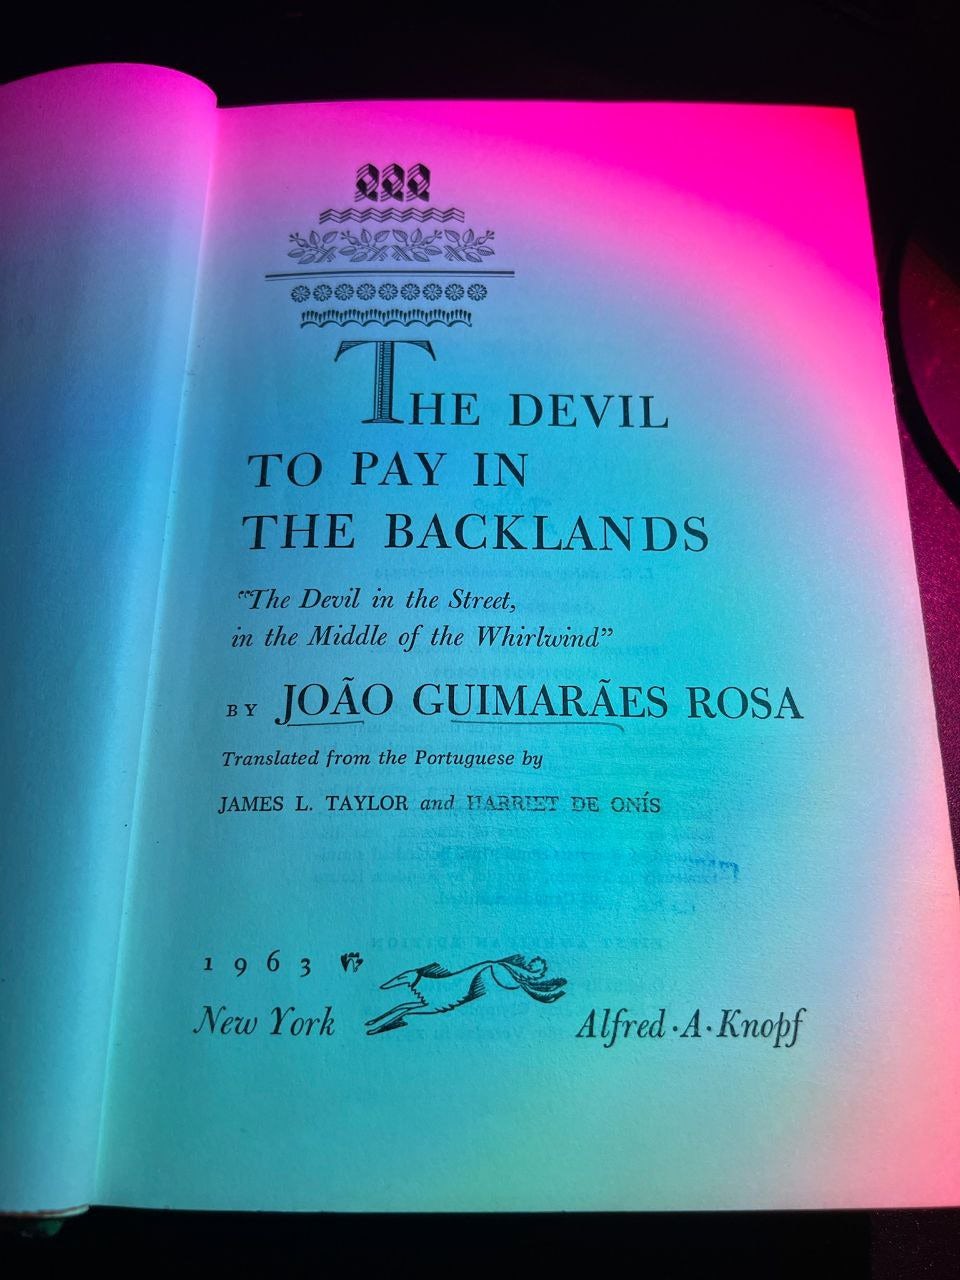 My rare (previously discarded!) copy of "The Devil to Pay in the Backlands" by João Guimarães Rosa 